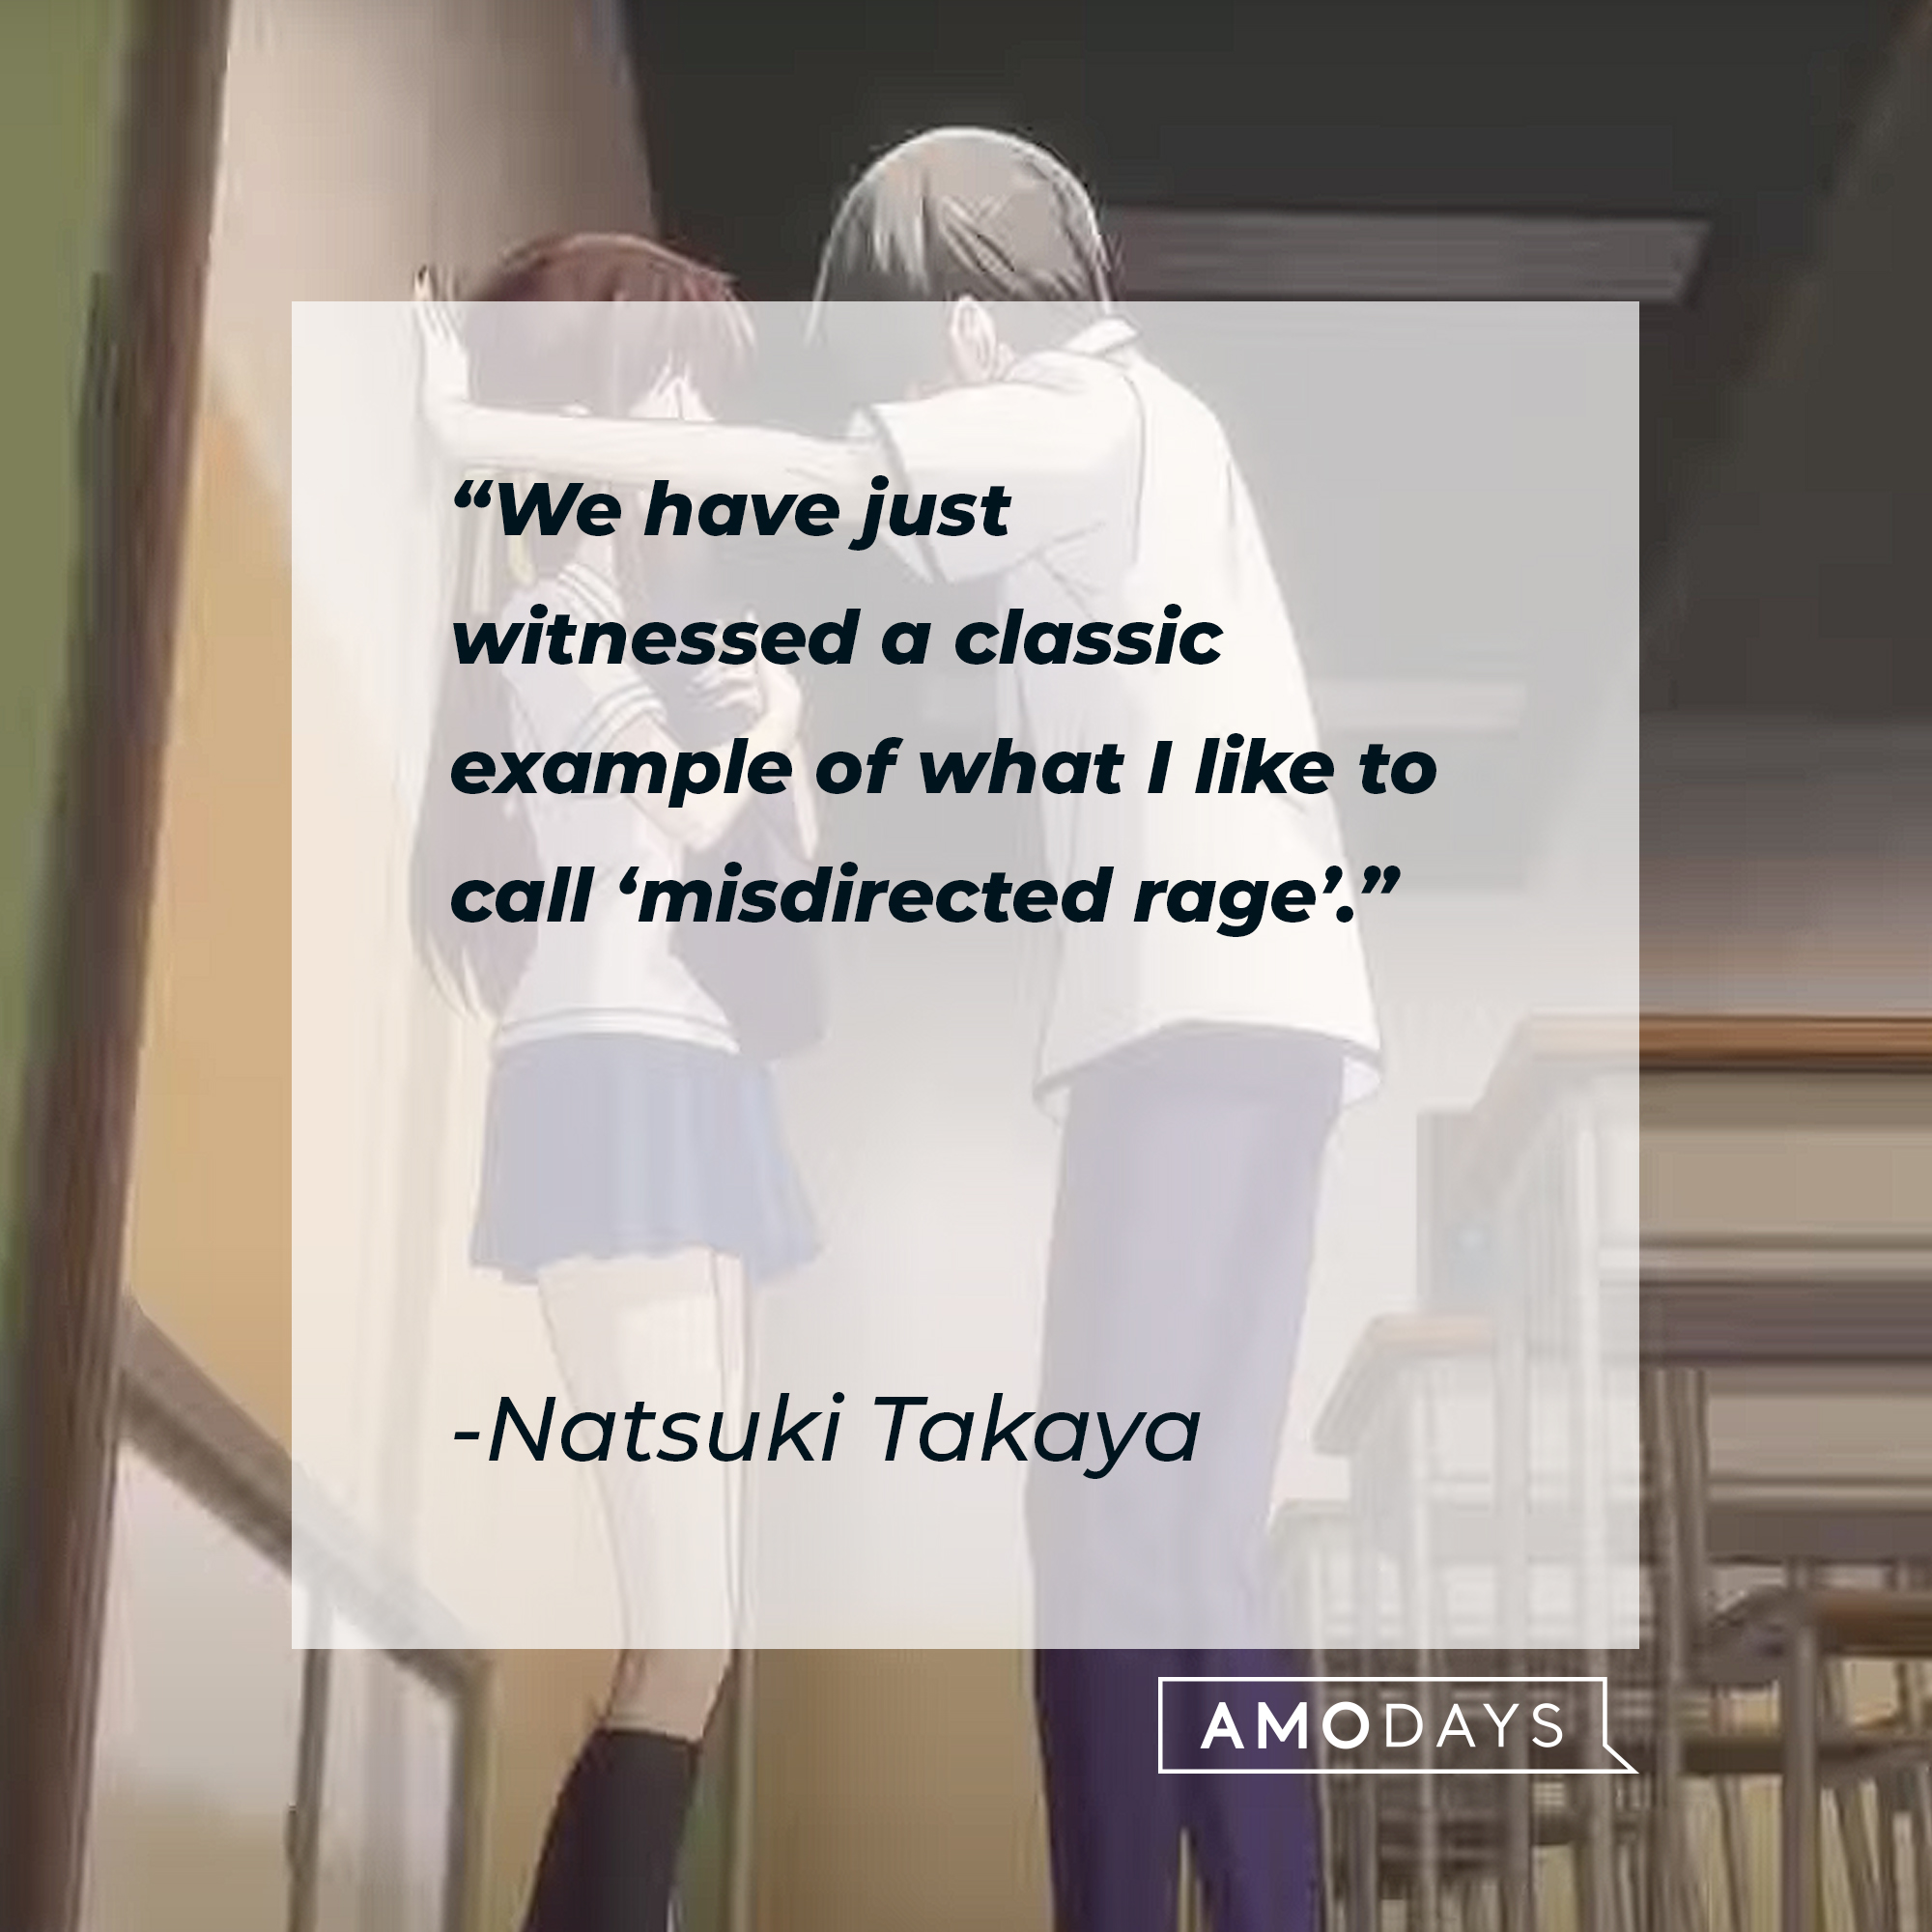 Natsuki Takaya's quote: "We have just witnessed a classic example of what I like to call 'misdirected rage'." | Image: youtube.com/Crunchyroll Collection